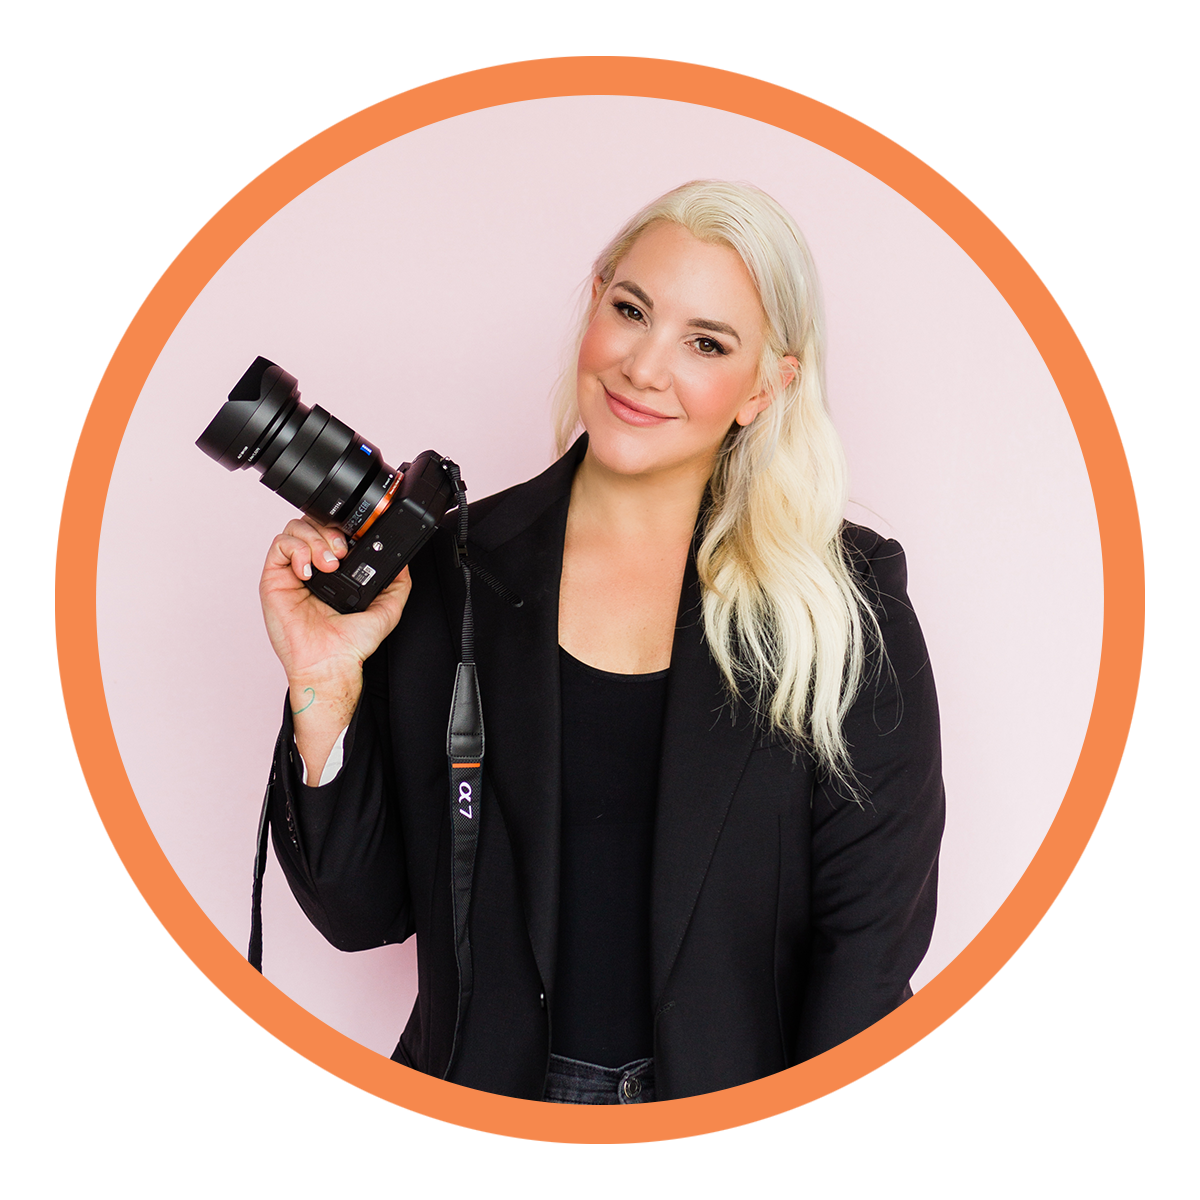  Kirsten comes to Dallas Doing Good after a decade of working as a photographer and creative professional in New York City. When she isn’t busy working to highlight nonprofits and community change makers, she can be found walking her yellow Labrador 